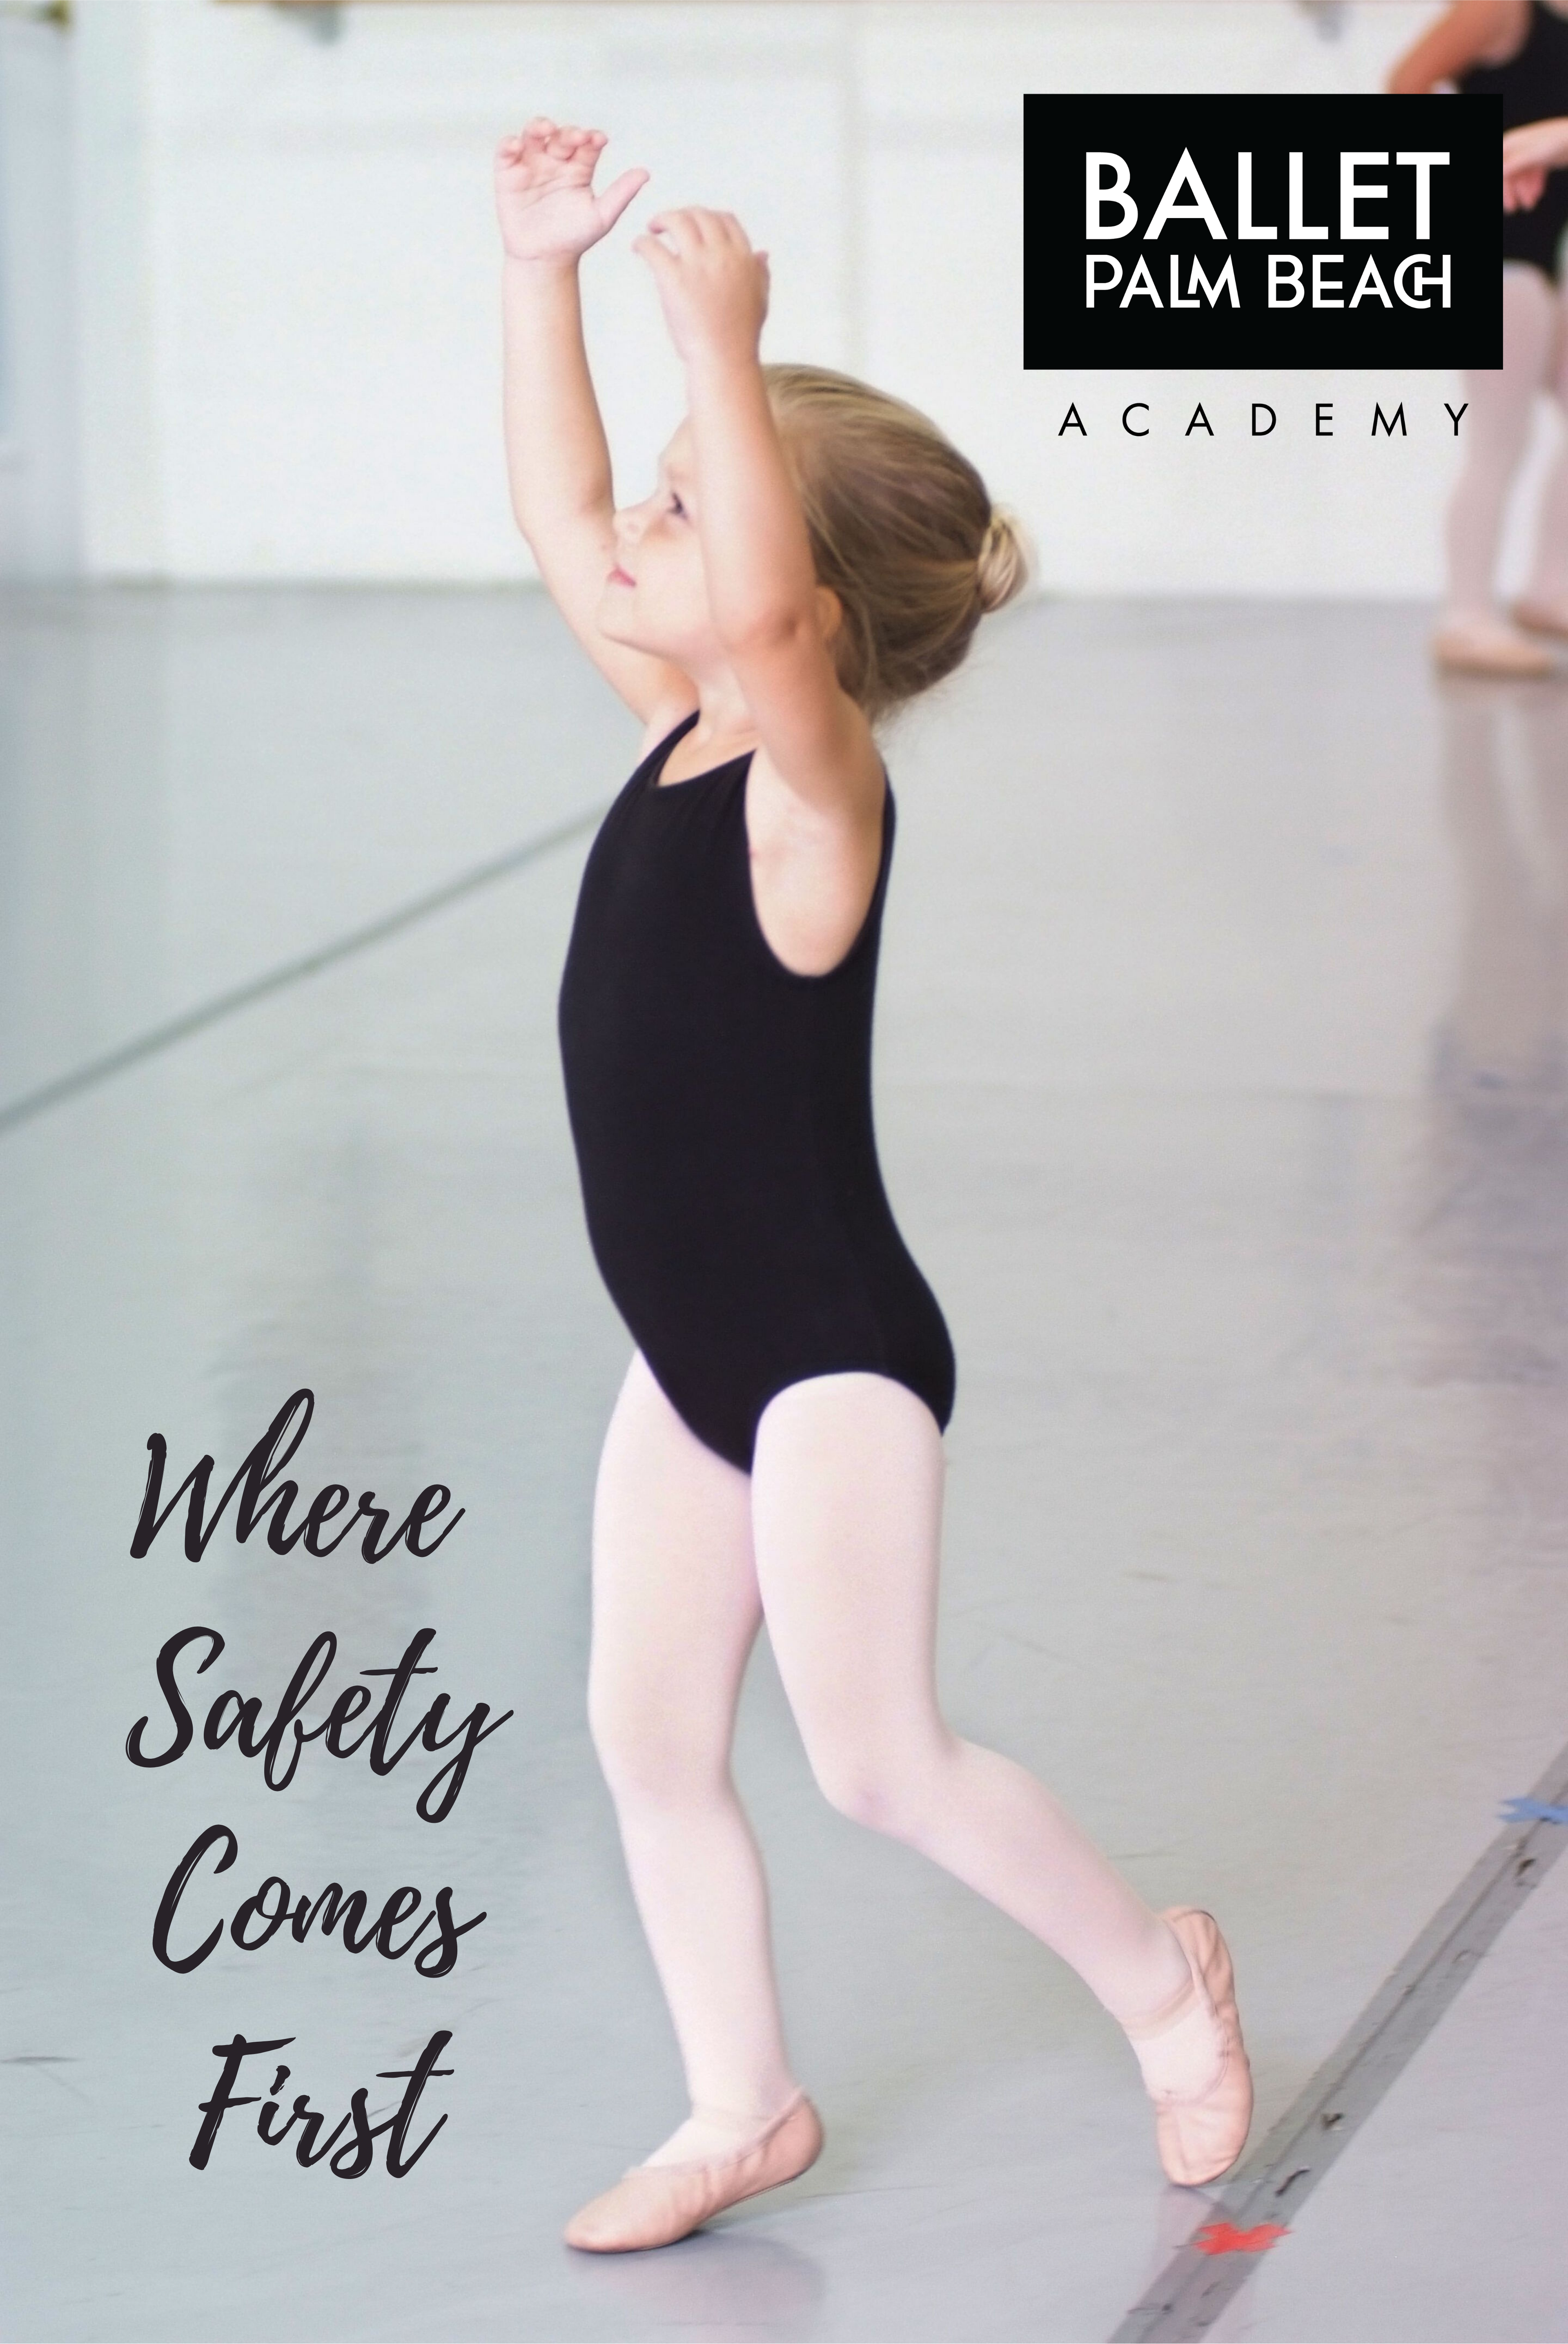 Ballet Palm Beach Academy - Where Safety Comes First